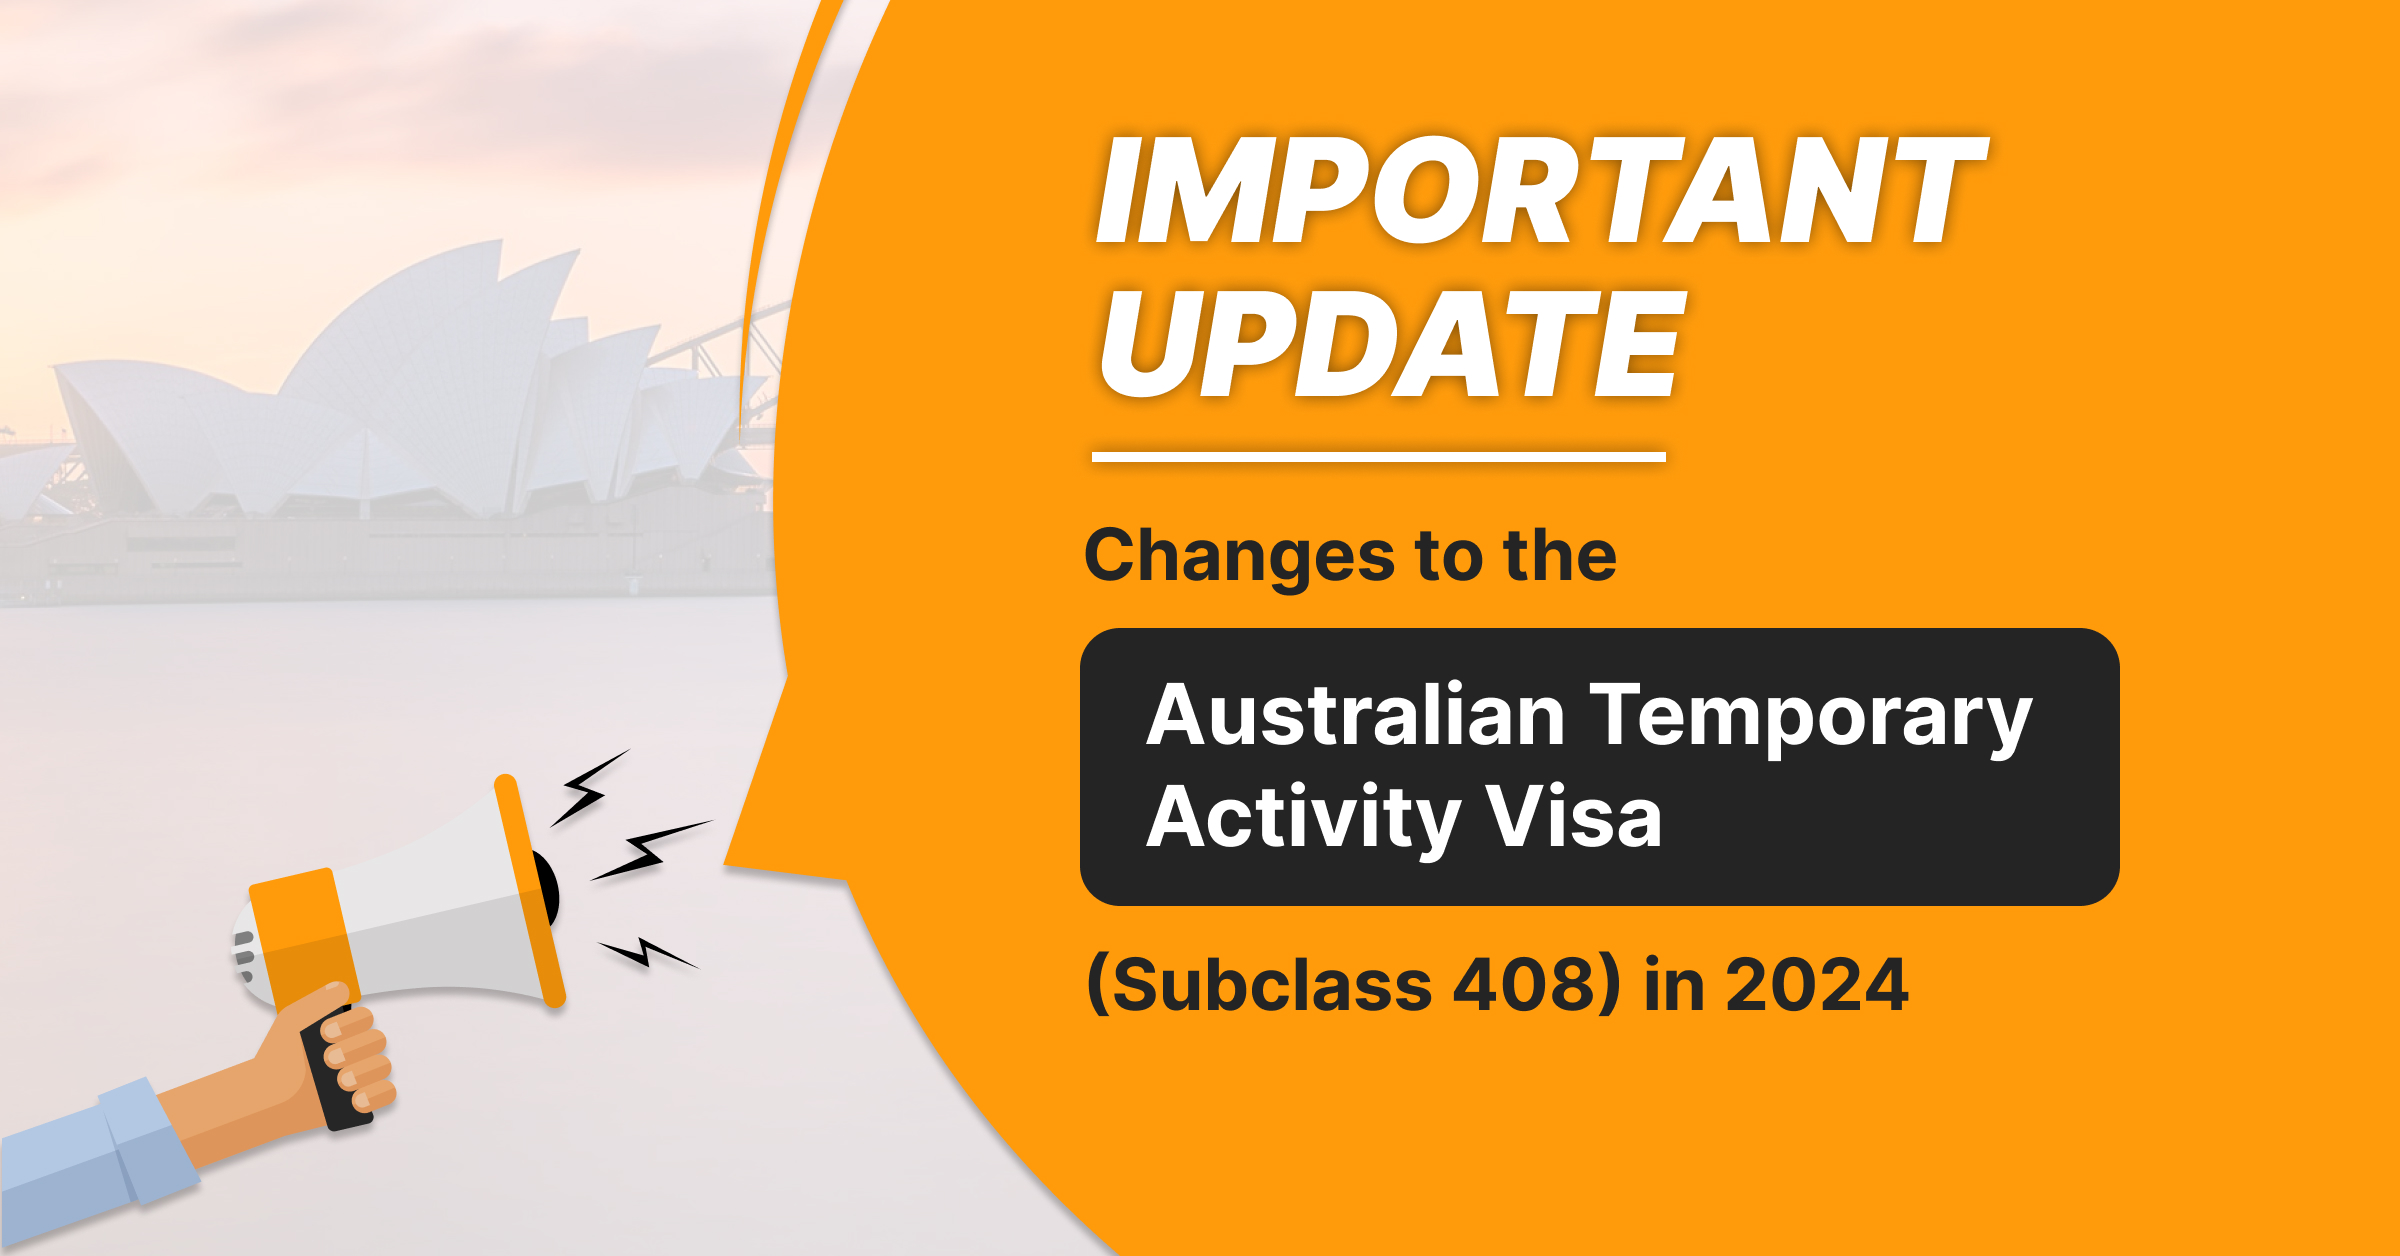 Important Update Changes to the Australian Temporary Activity Visa (Subclass 408) in 2024